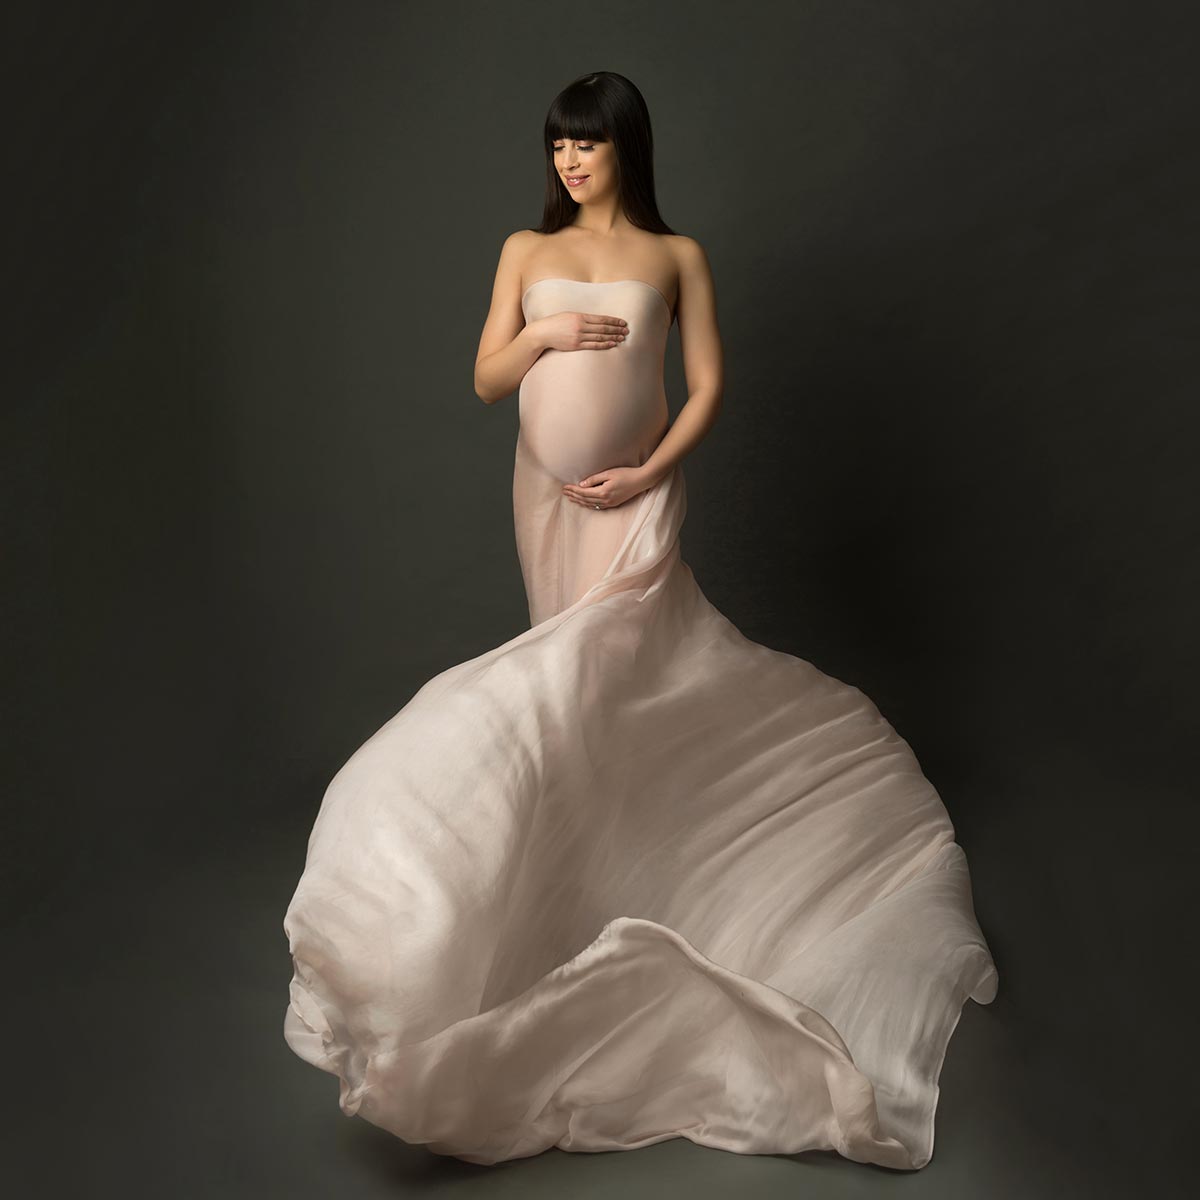 Flying silks surround this pregnant woman posing for a maternity photo